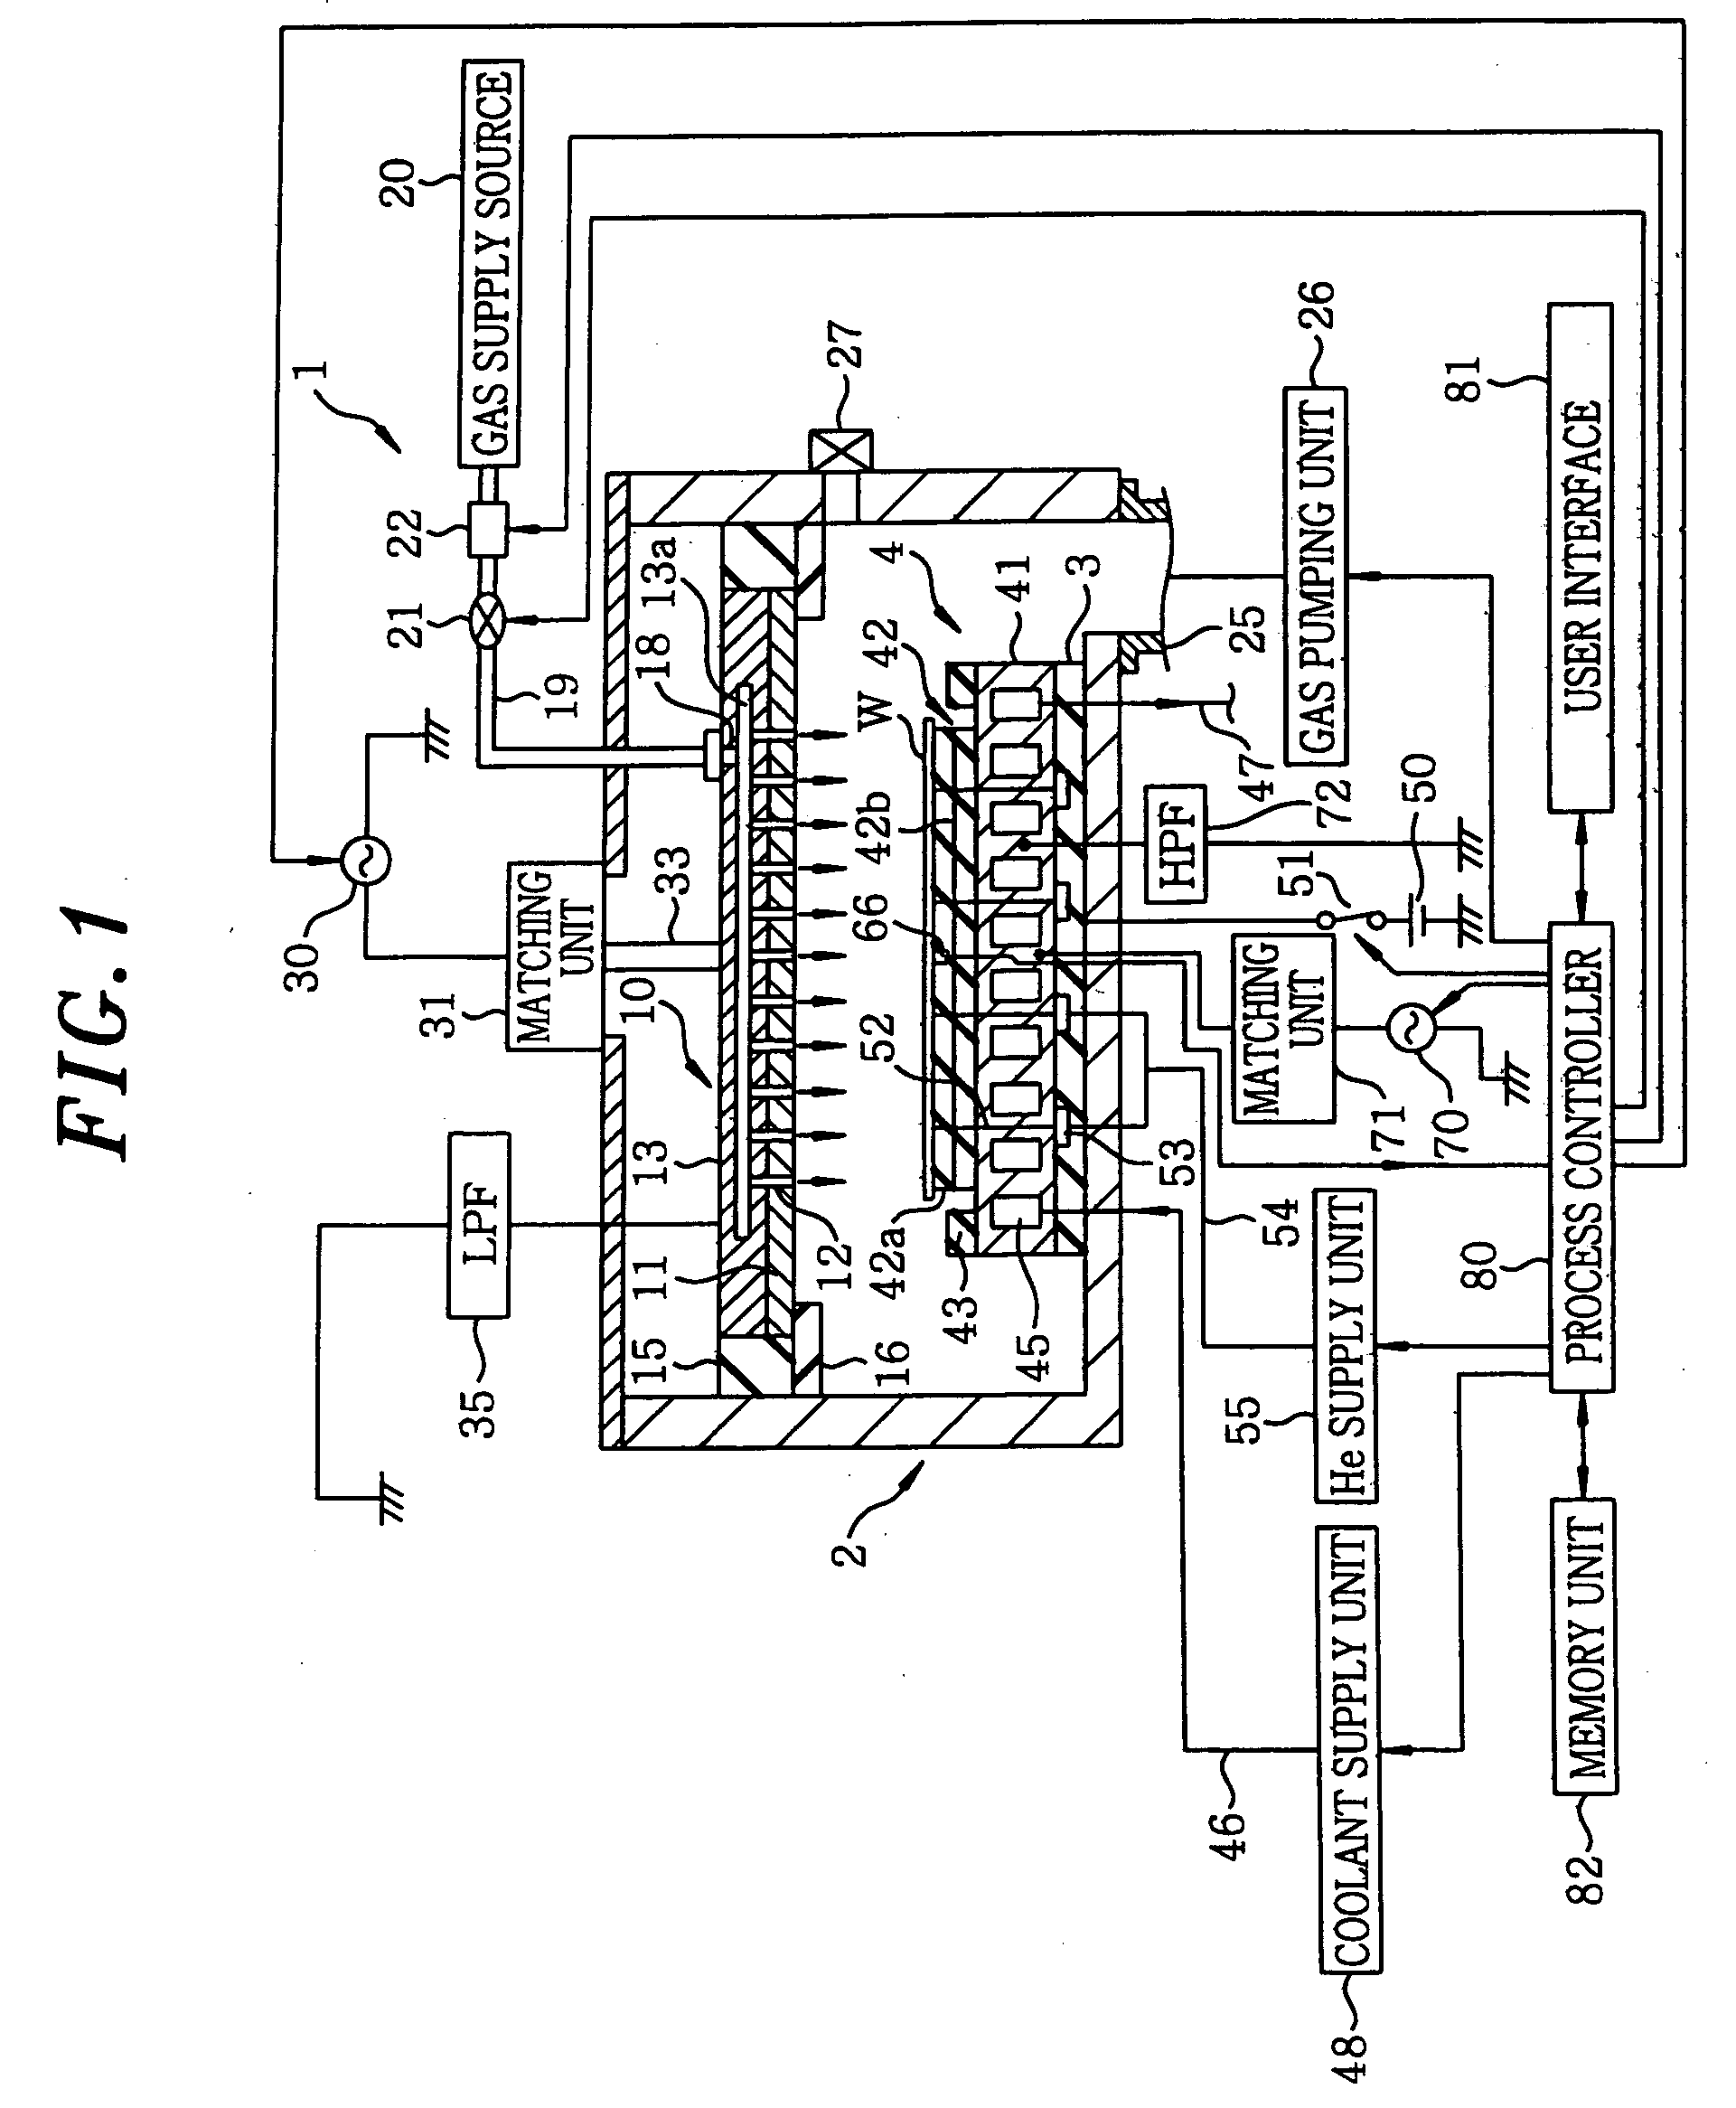 Substrate mounting table, substrate processing apparatus and substrate temperature control method